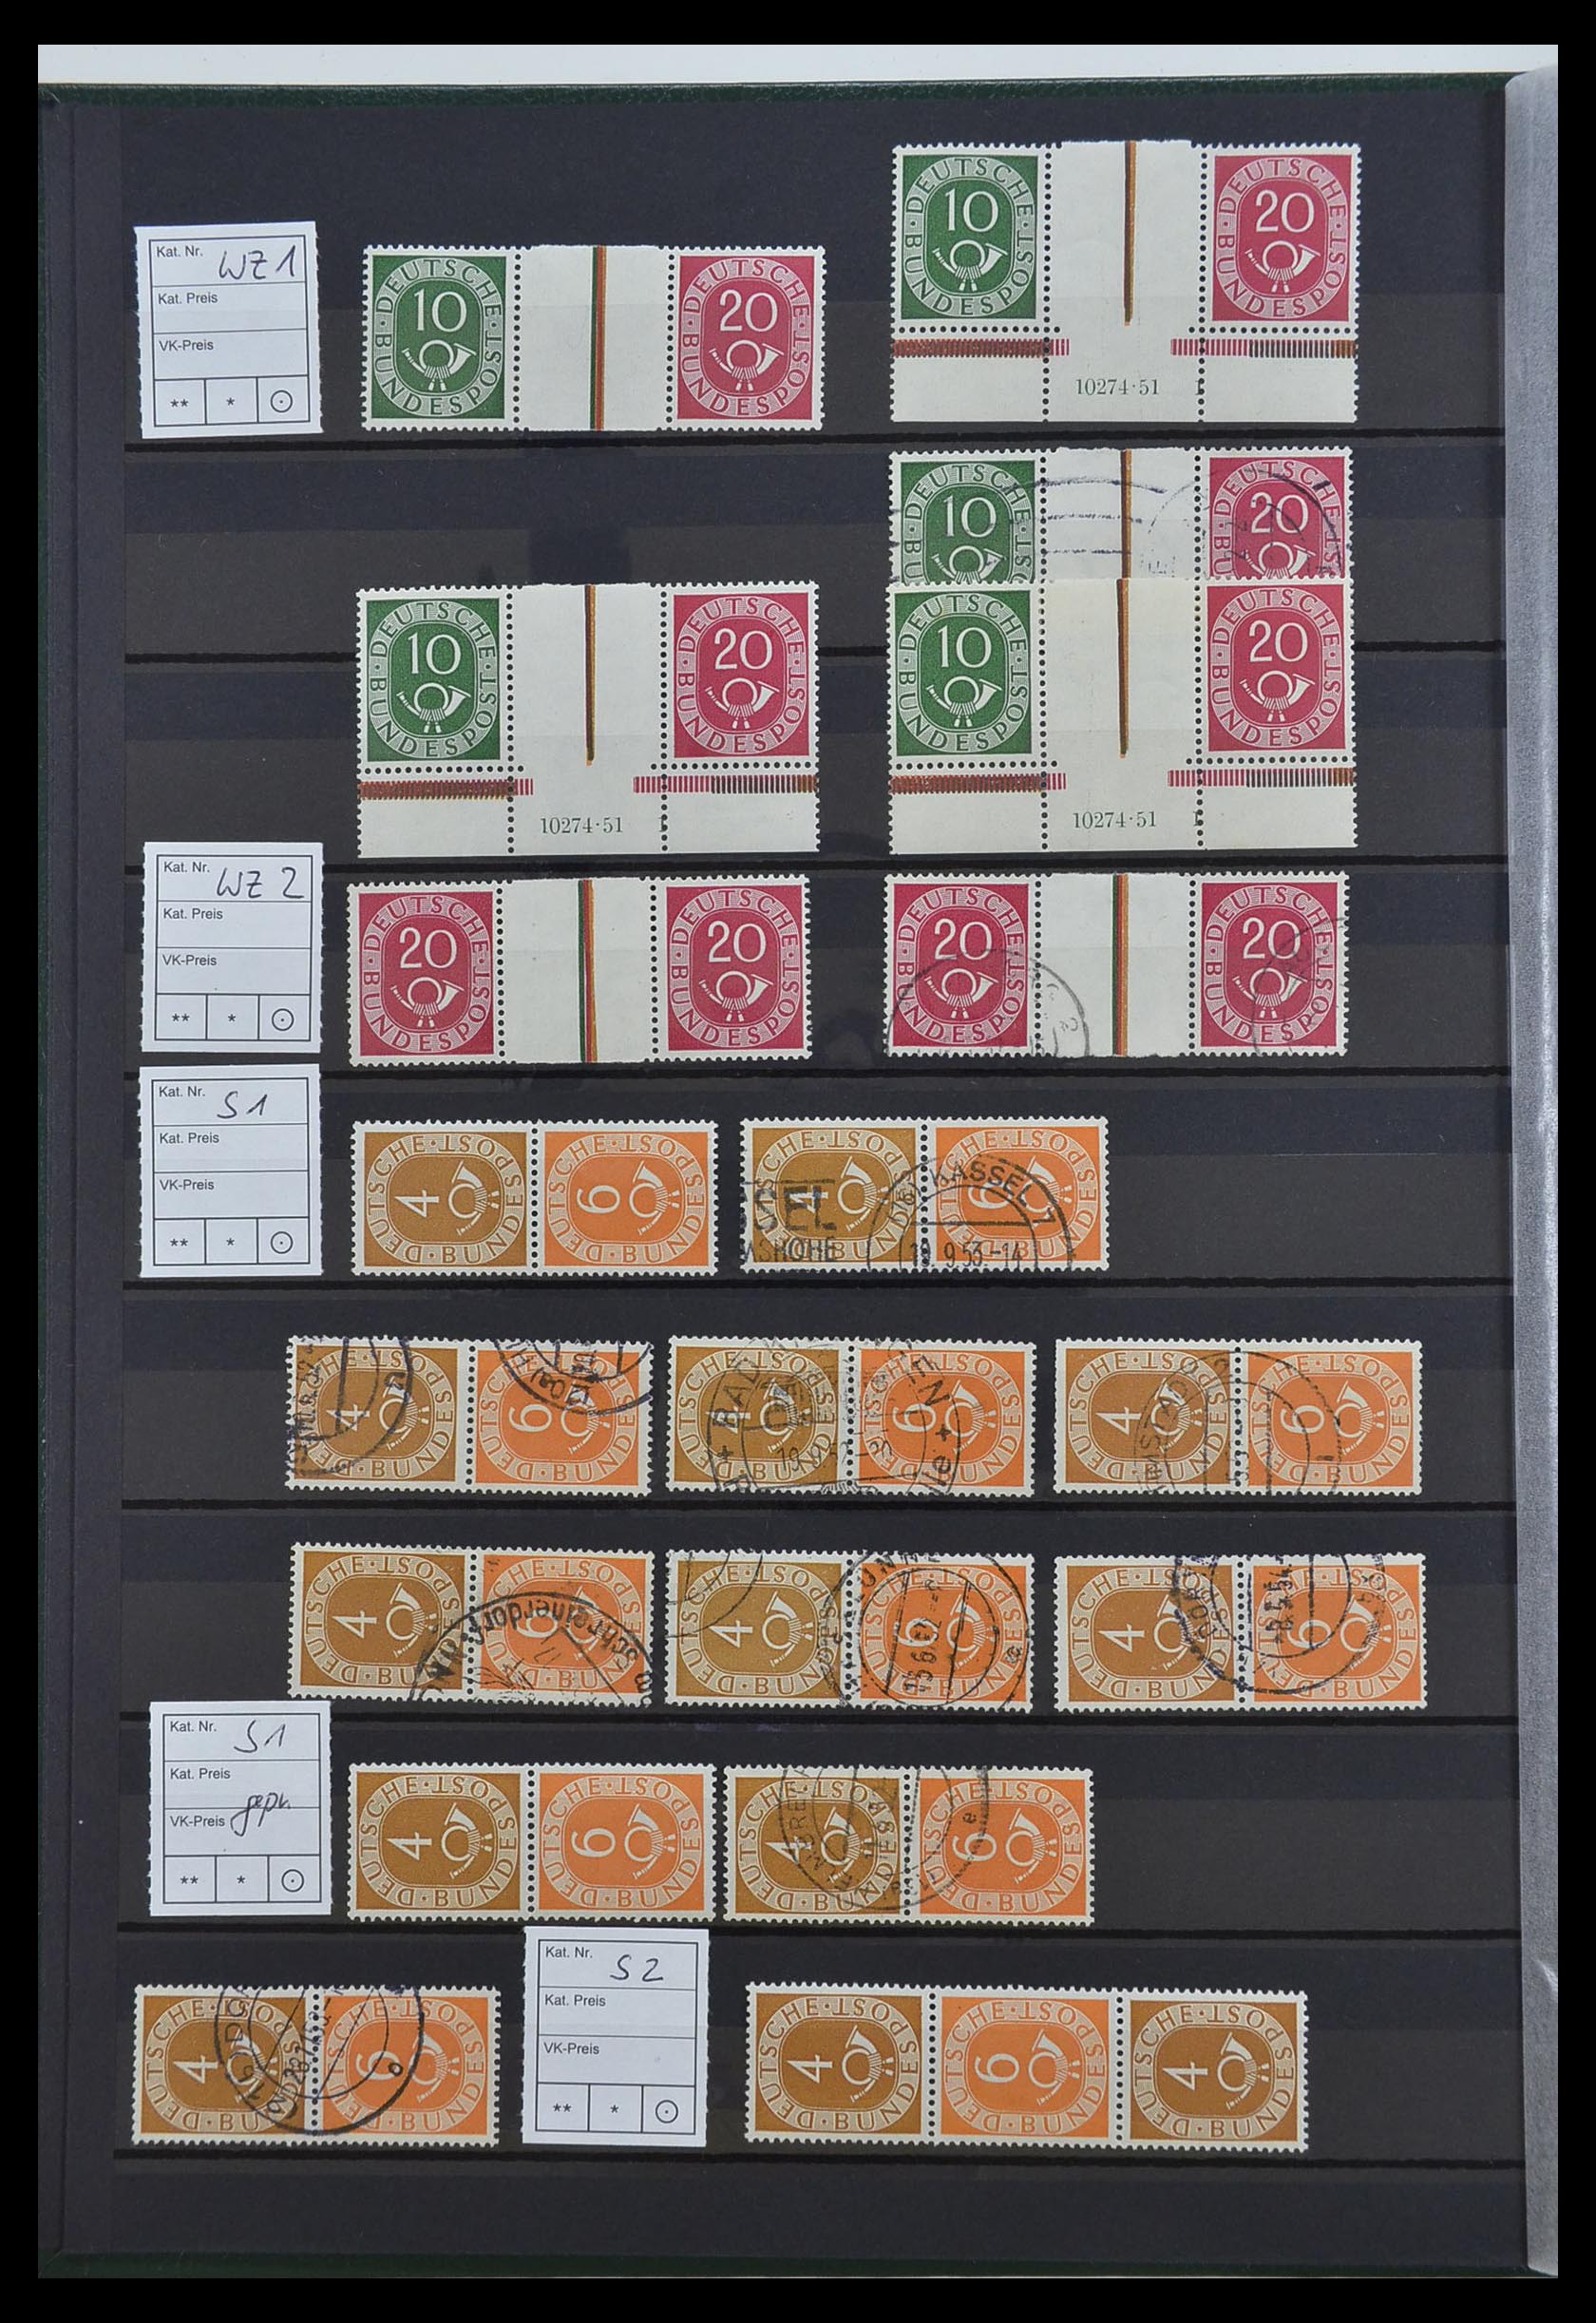 33275 002 - Stamp collection 33275 Bundespost combinations 1951-1960.